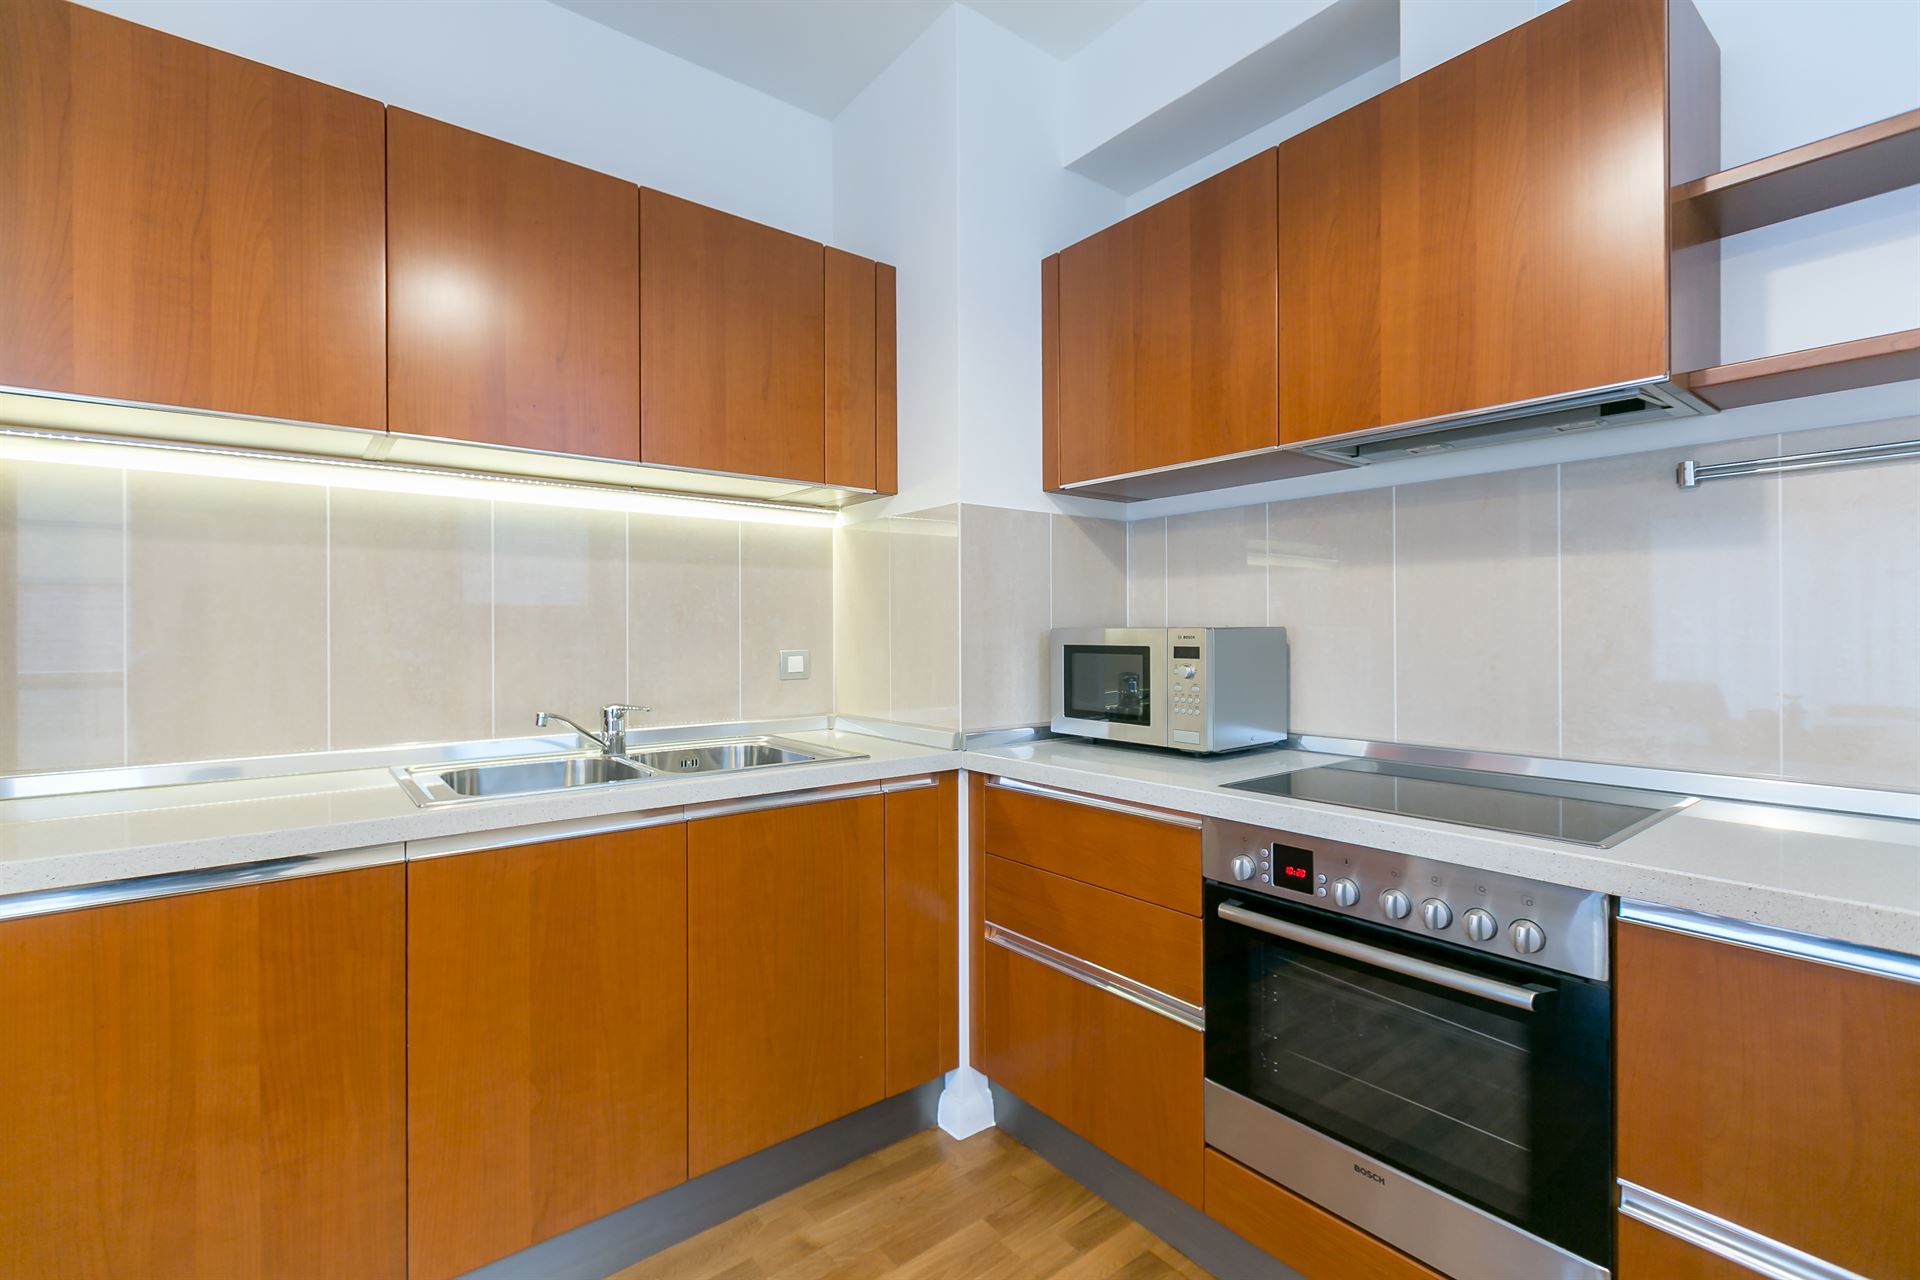 budapest-rental-long-term-lease-luxury-1-bedroom-apartment-with-view-flatrental-budapest-castle-district-18